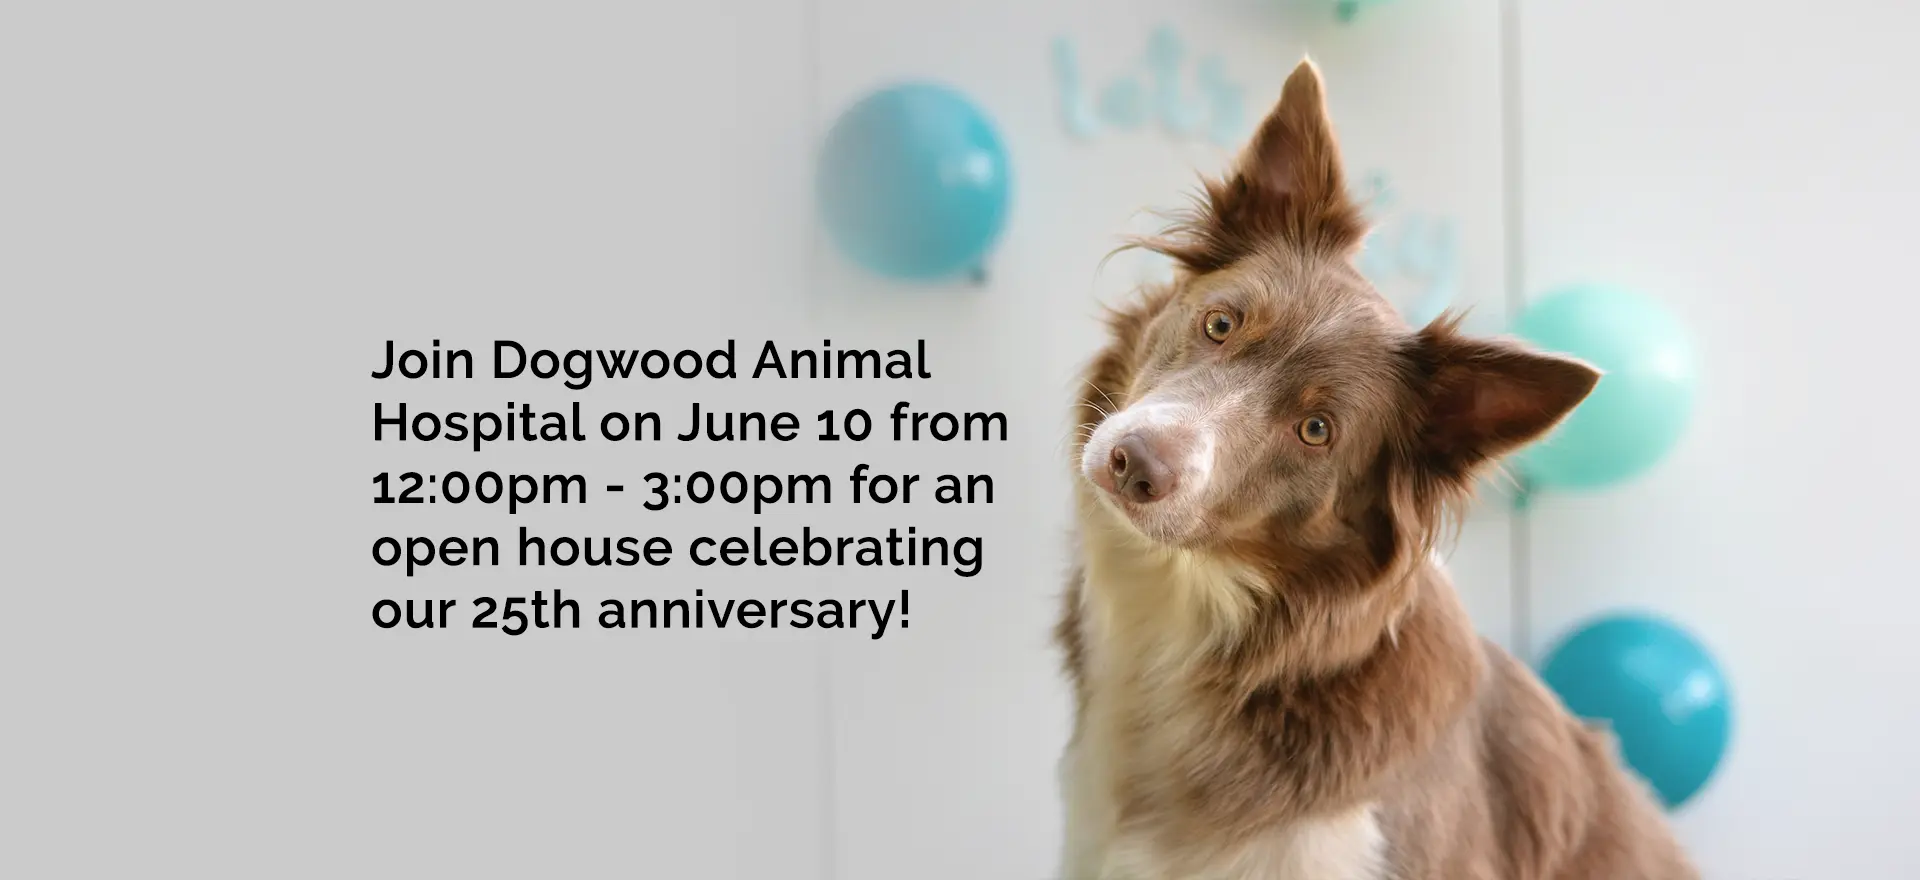 Join Dogwood Animal Hospital on June 10 from 12:00pm - 3:00pm for an open house celebrating our 25th anniversary! 